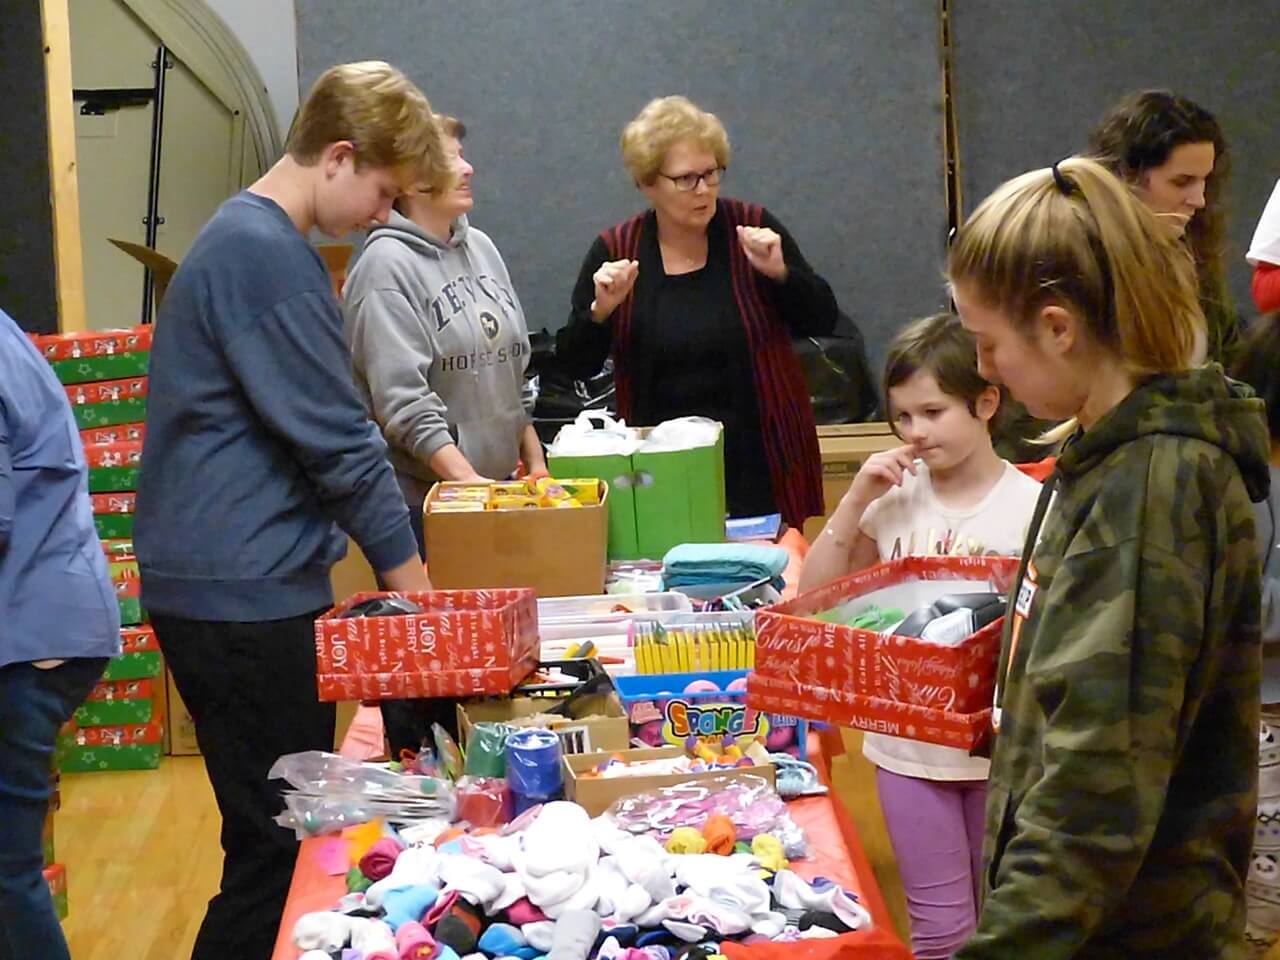 Operation Christmas Child shoeboxes are packed Nov. 17 at First united Methodist Churc of Cape May Court House by congregation members and friends.